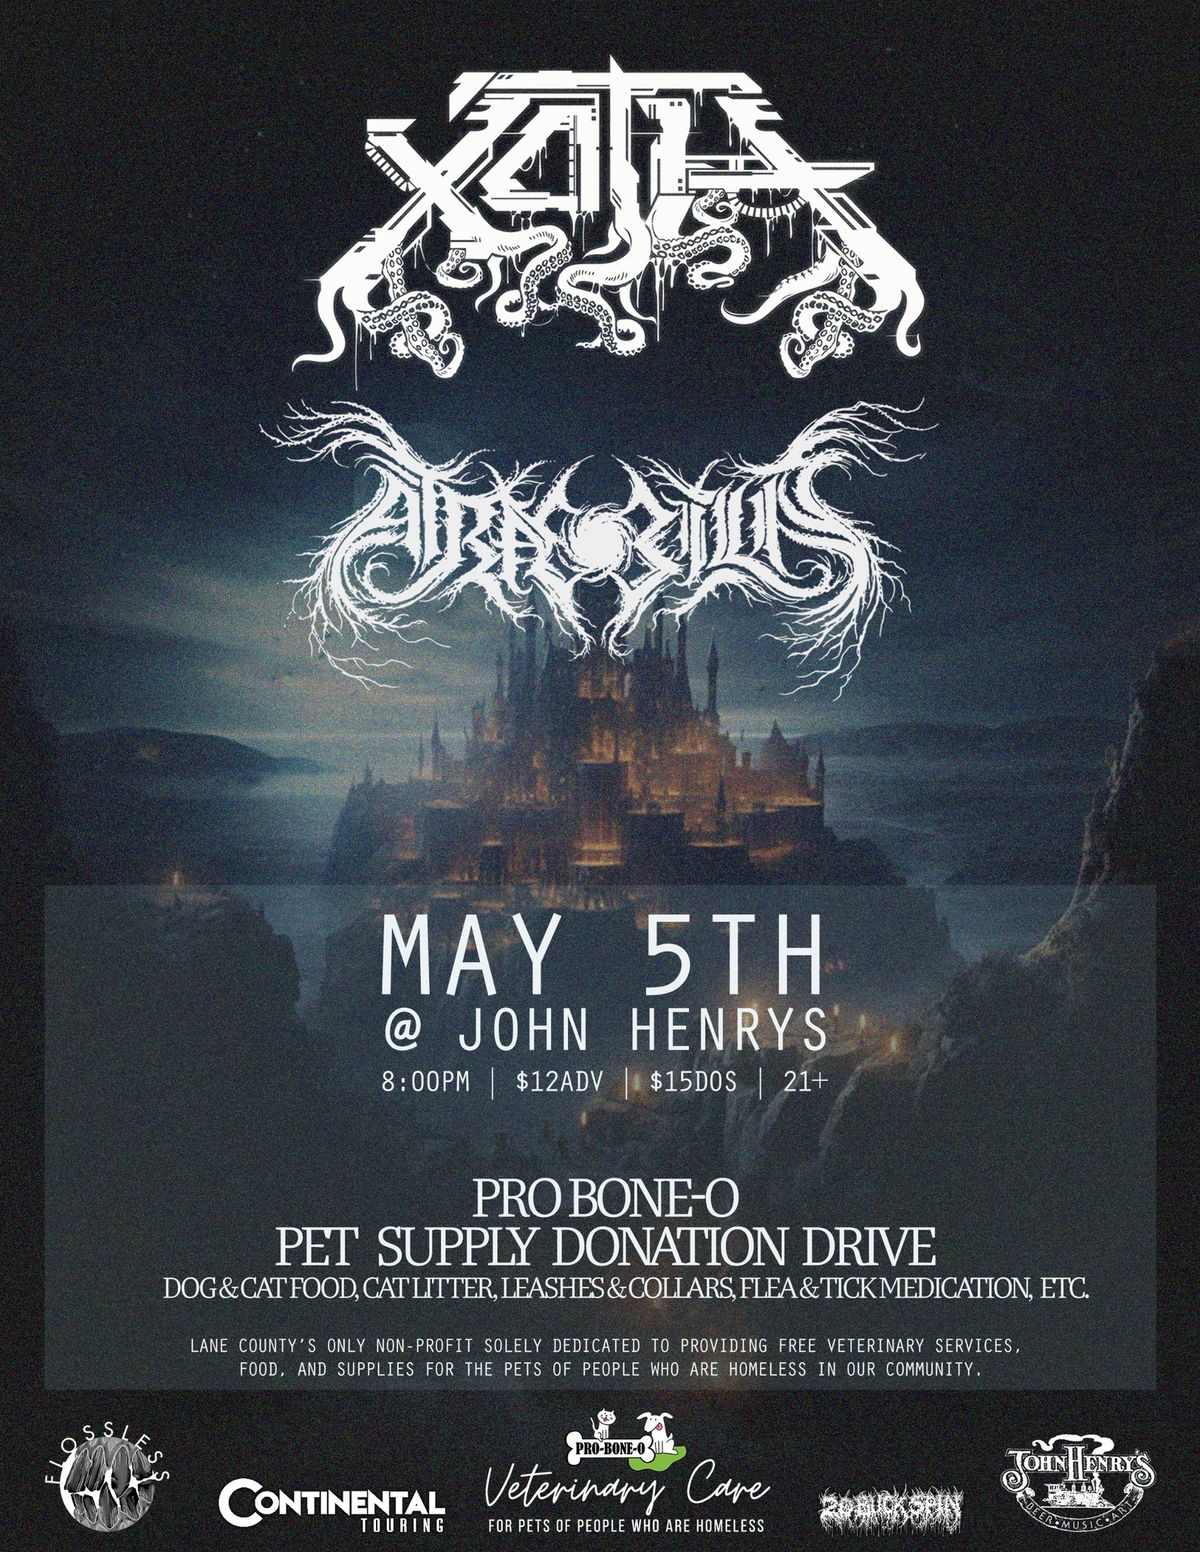 Death Metal & Supply Drive for Pro-Bone-O with XOTH and ATRAE BILIS!